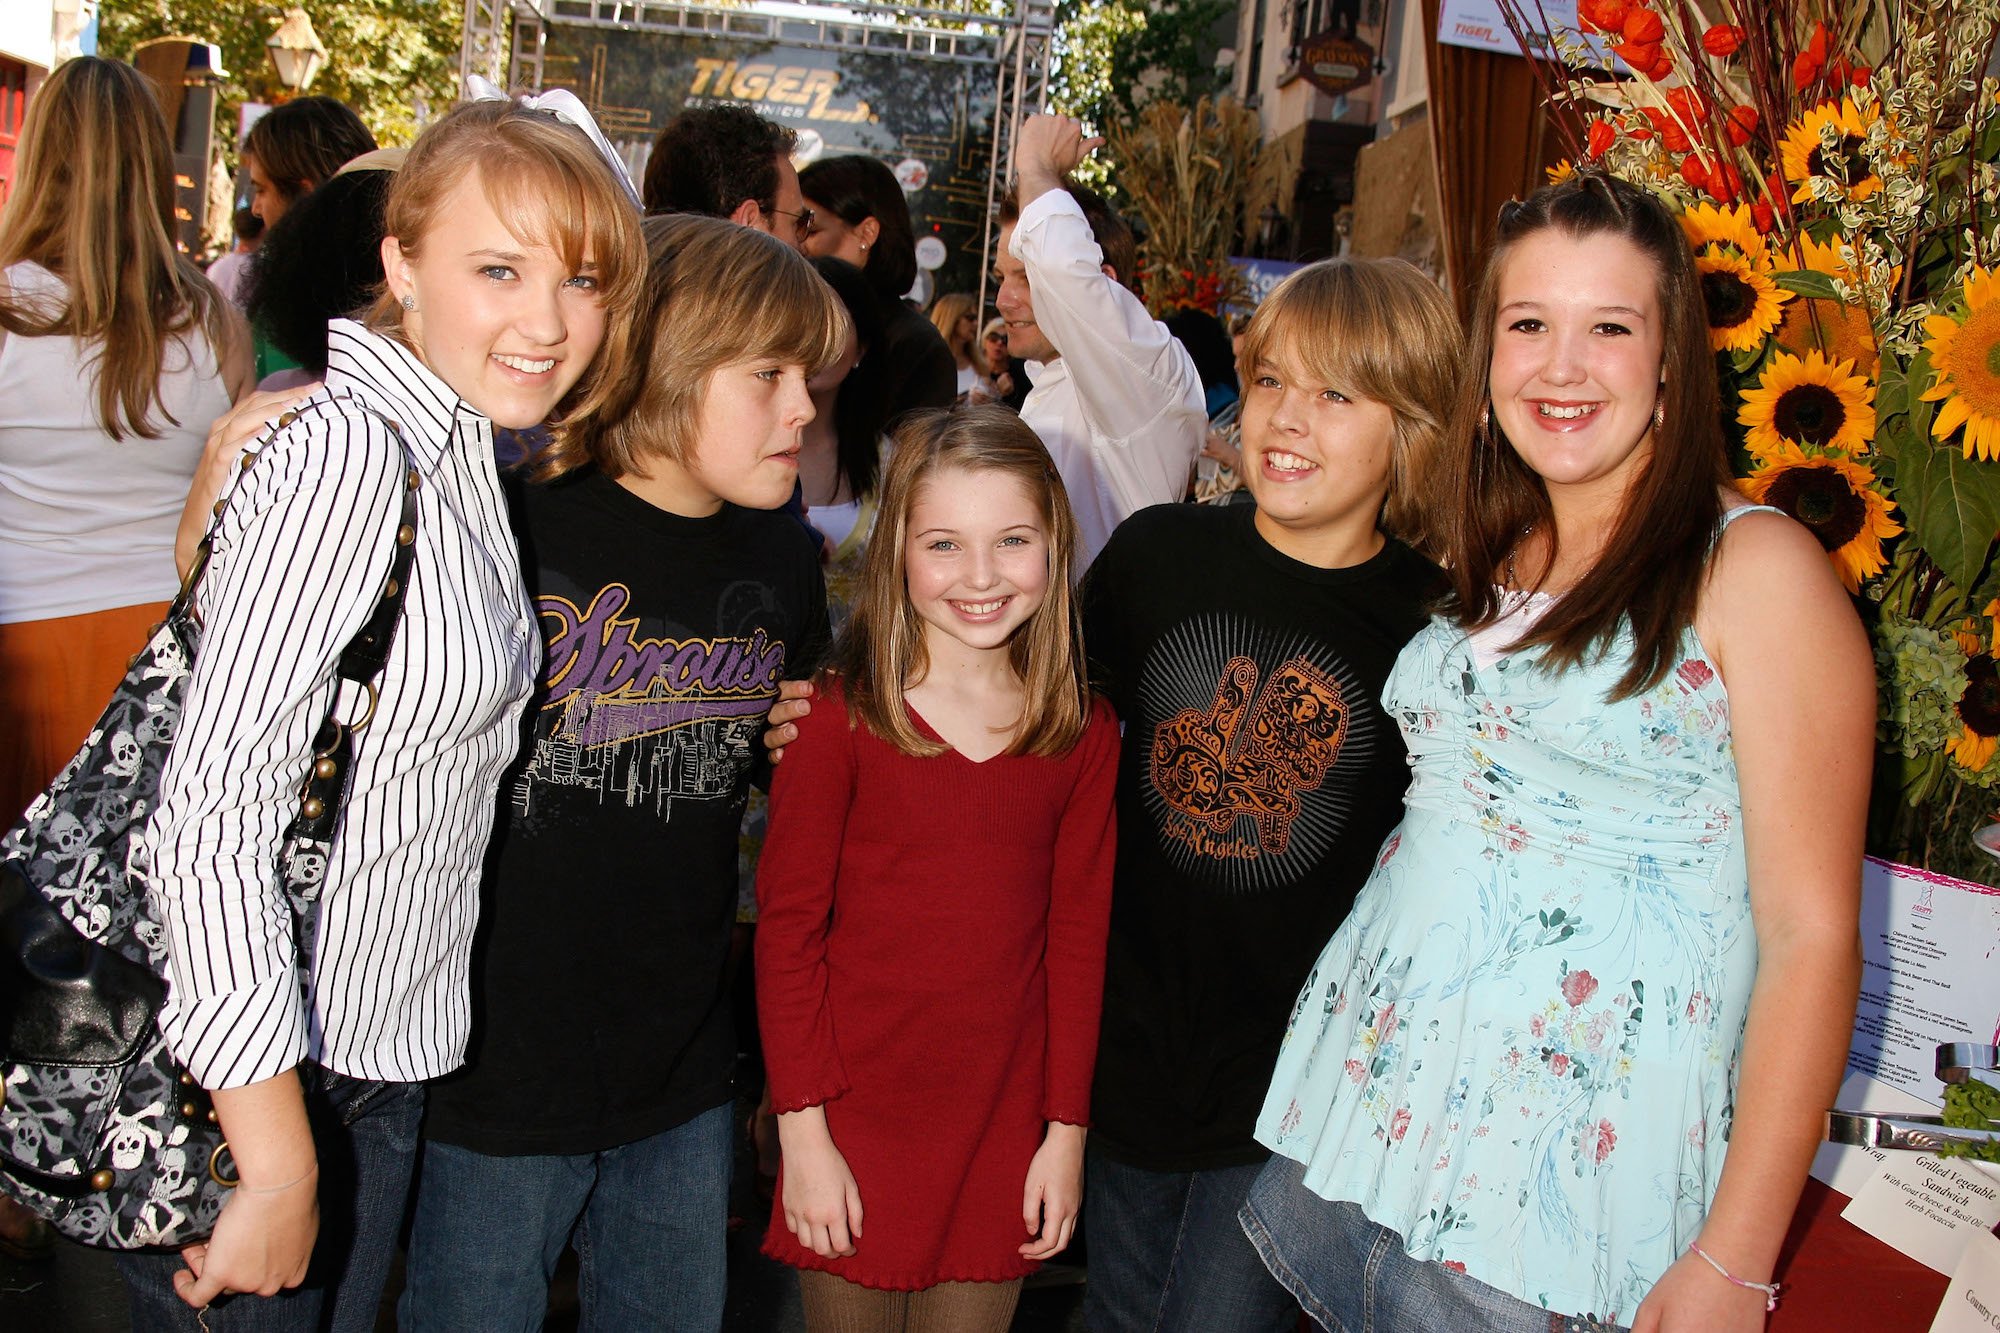 'Suite Life of Zack and Cody' stars Dylan and Cole Sprouse pose for a photo with Emily Osment, Samantha Hanratty and Jaelin Palmer